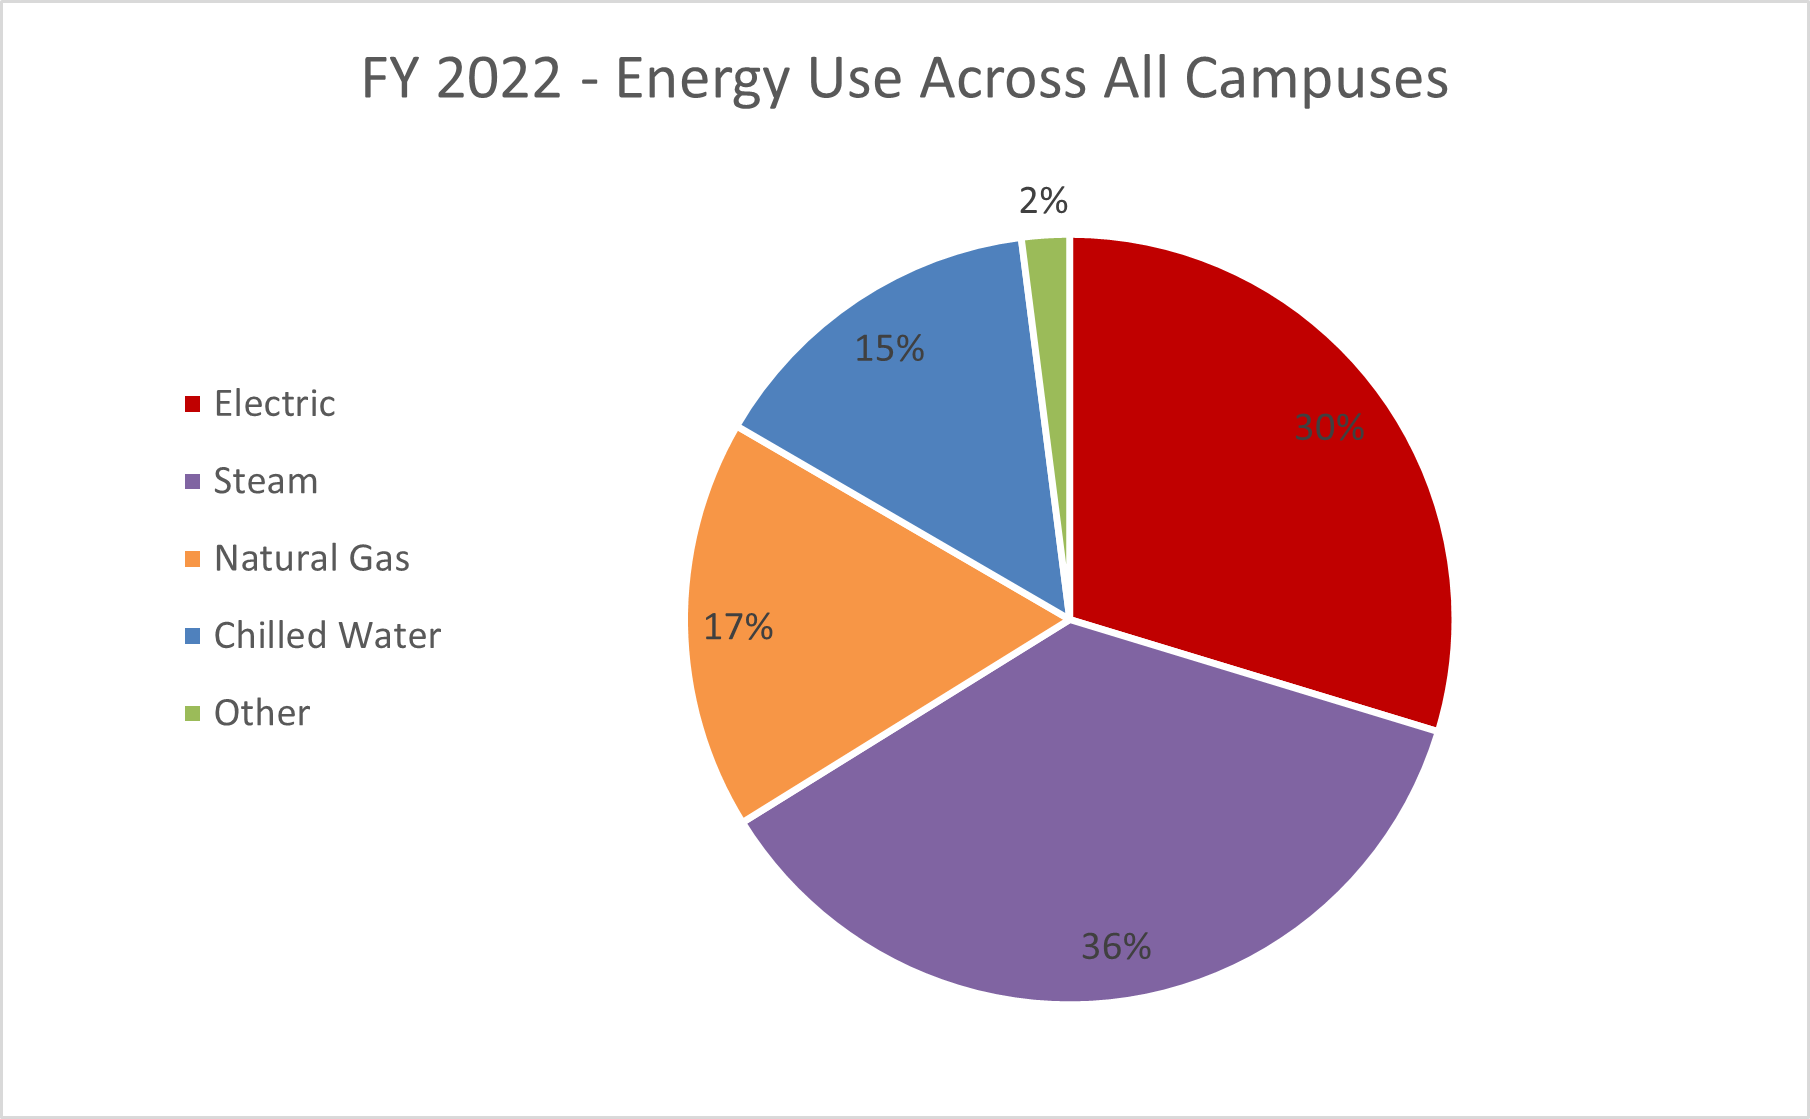 FY 2022 Energy Use Across All Campuses